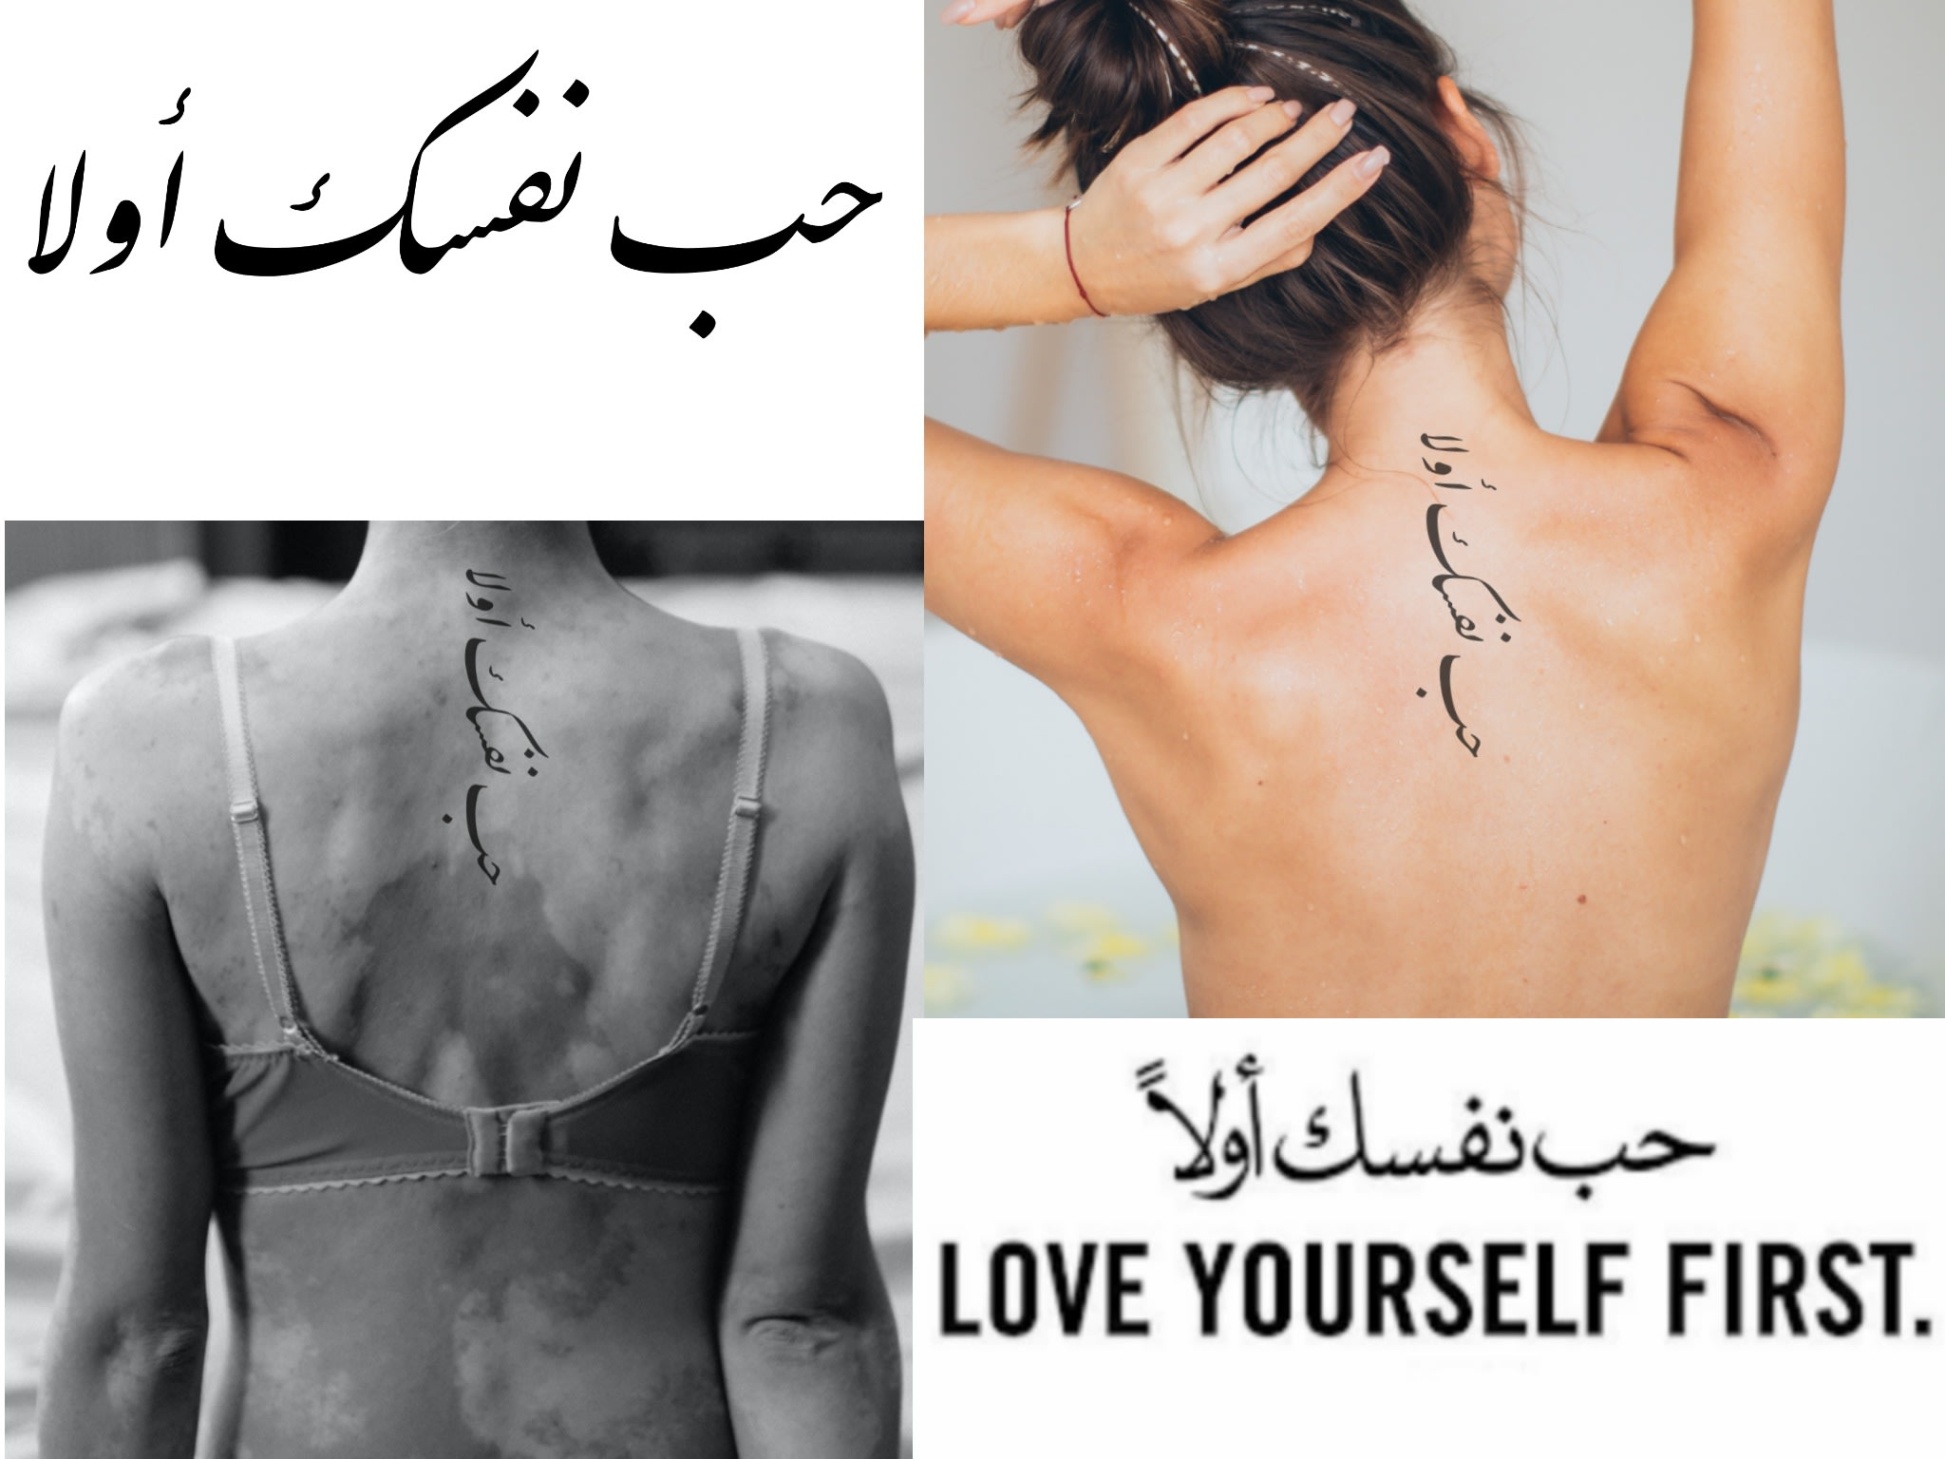 Discover The Beauty Of Arabic Calligraphy With Stunning Tattoo Designs